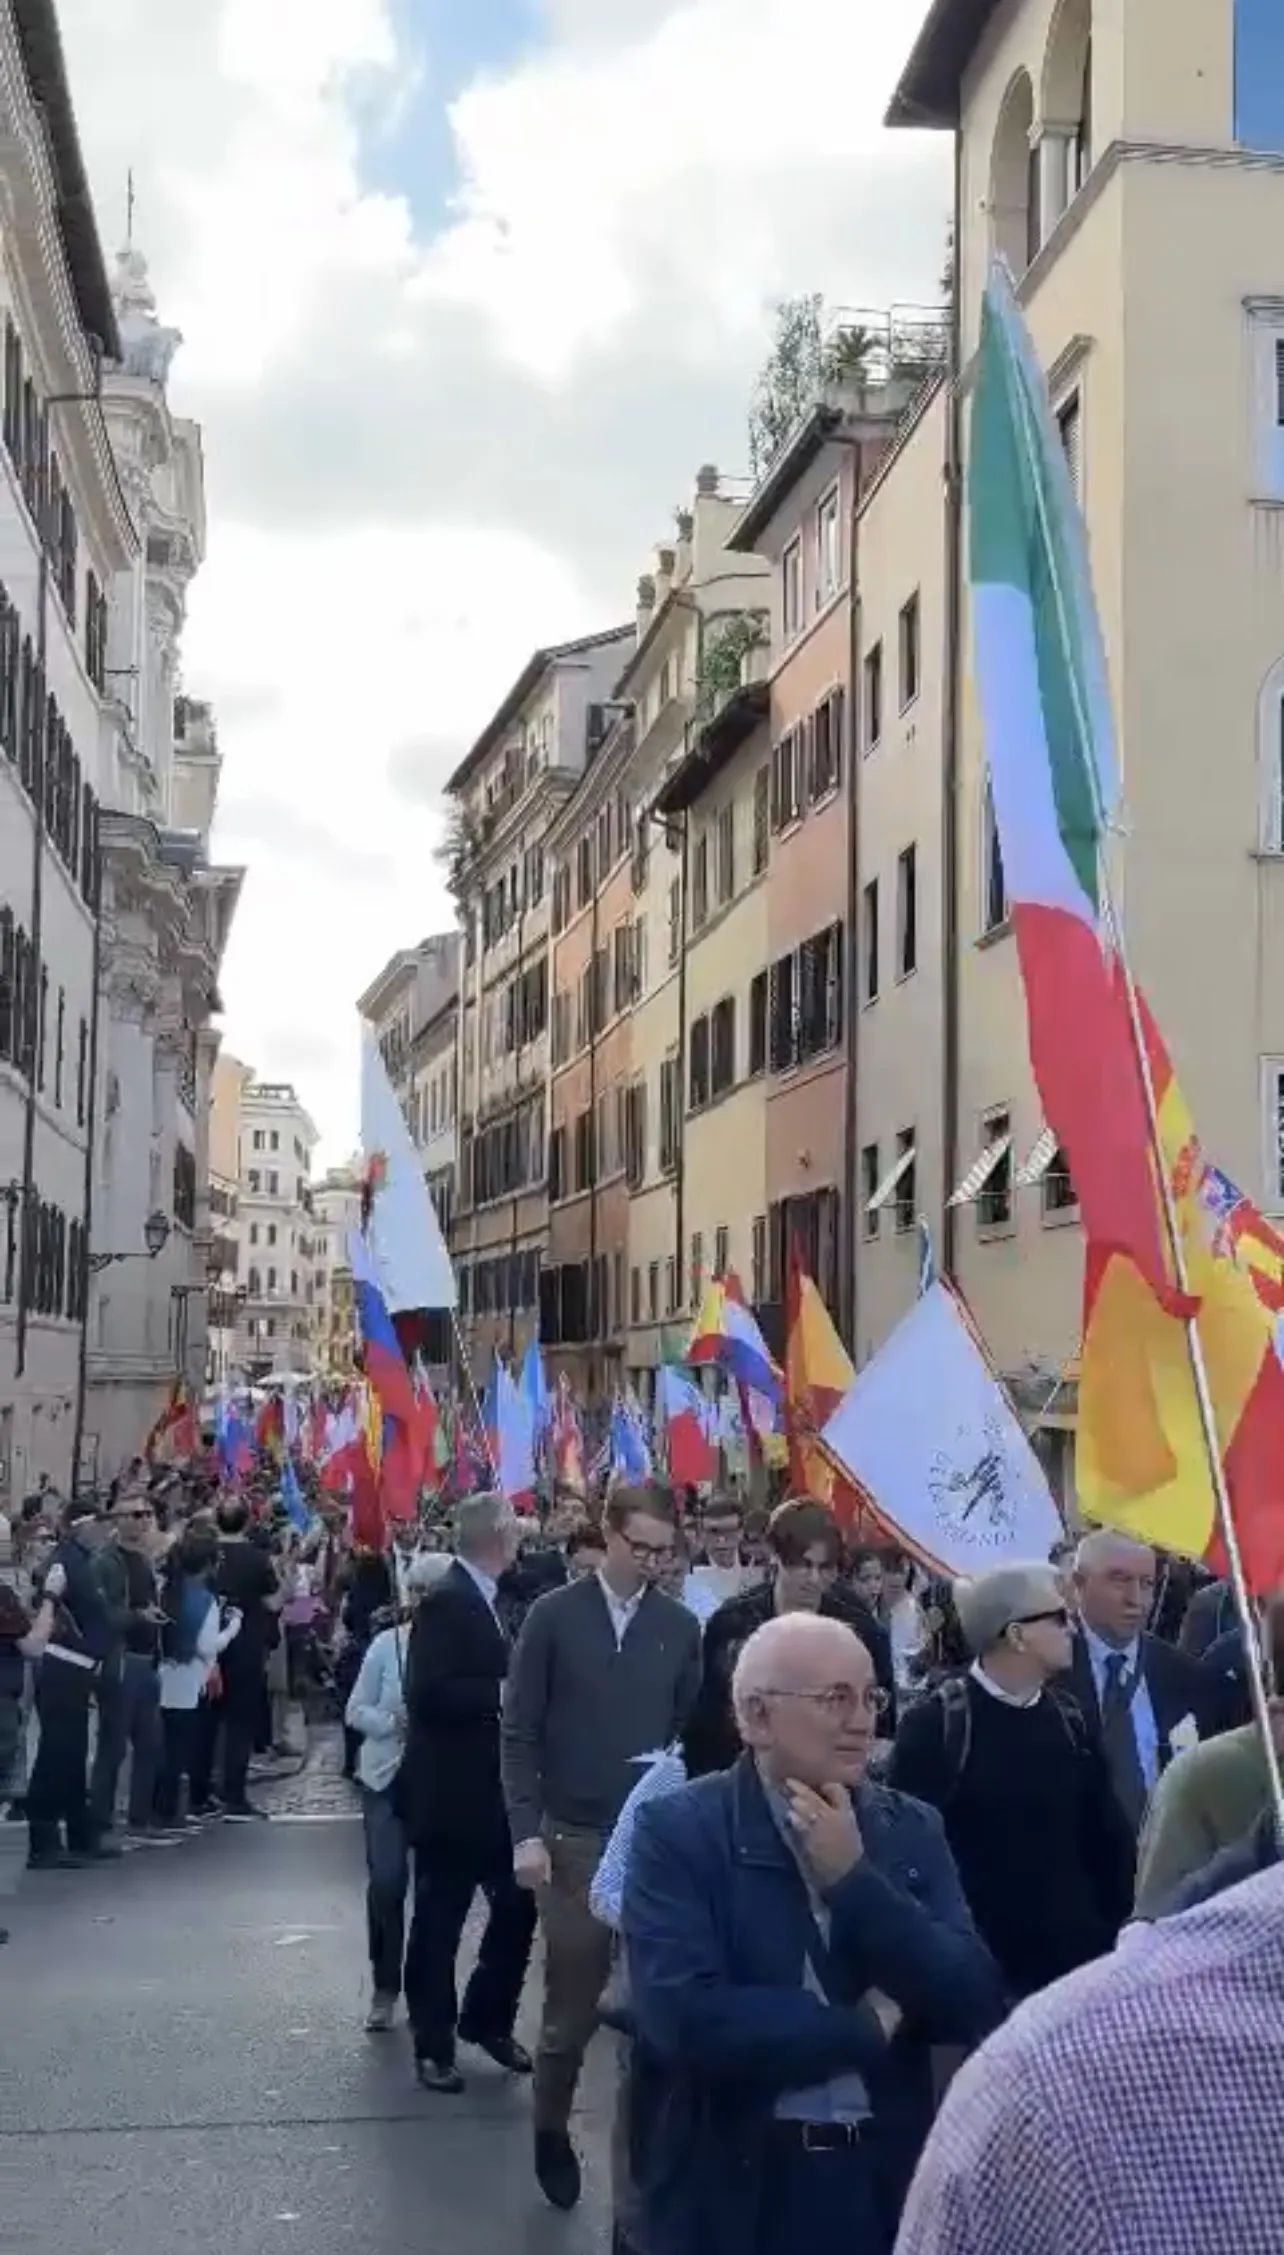 Pilgrims participate in a Eucharistic procession along the streets of Rome on Oct. 28, 2023, as part of the Summorum Pontificum pilgrimage, an annual three-day pilgrimage for devotees of the Traditional Latin Mass. Credit: Mountain Burtoc